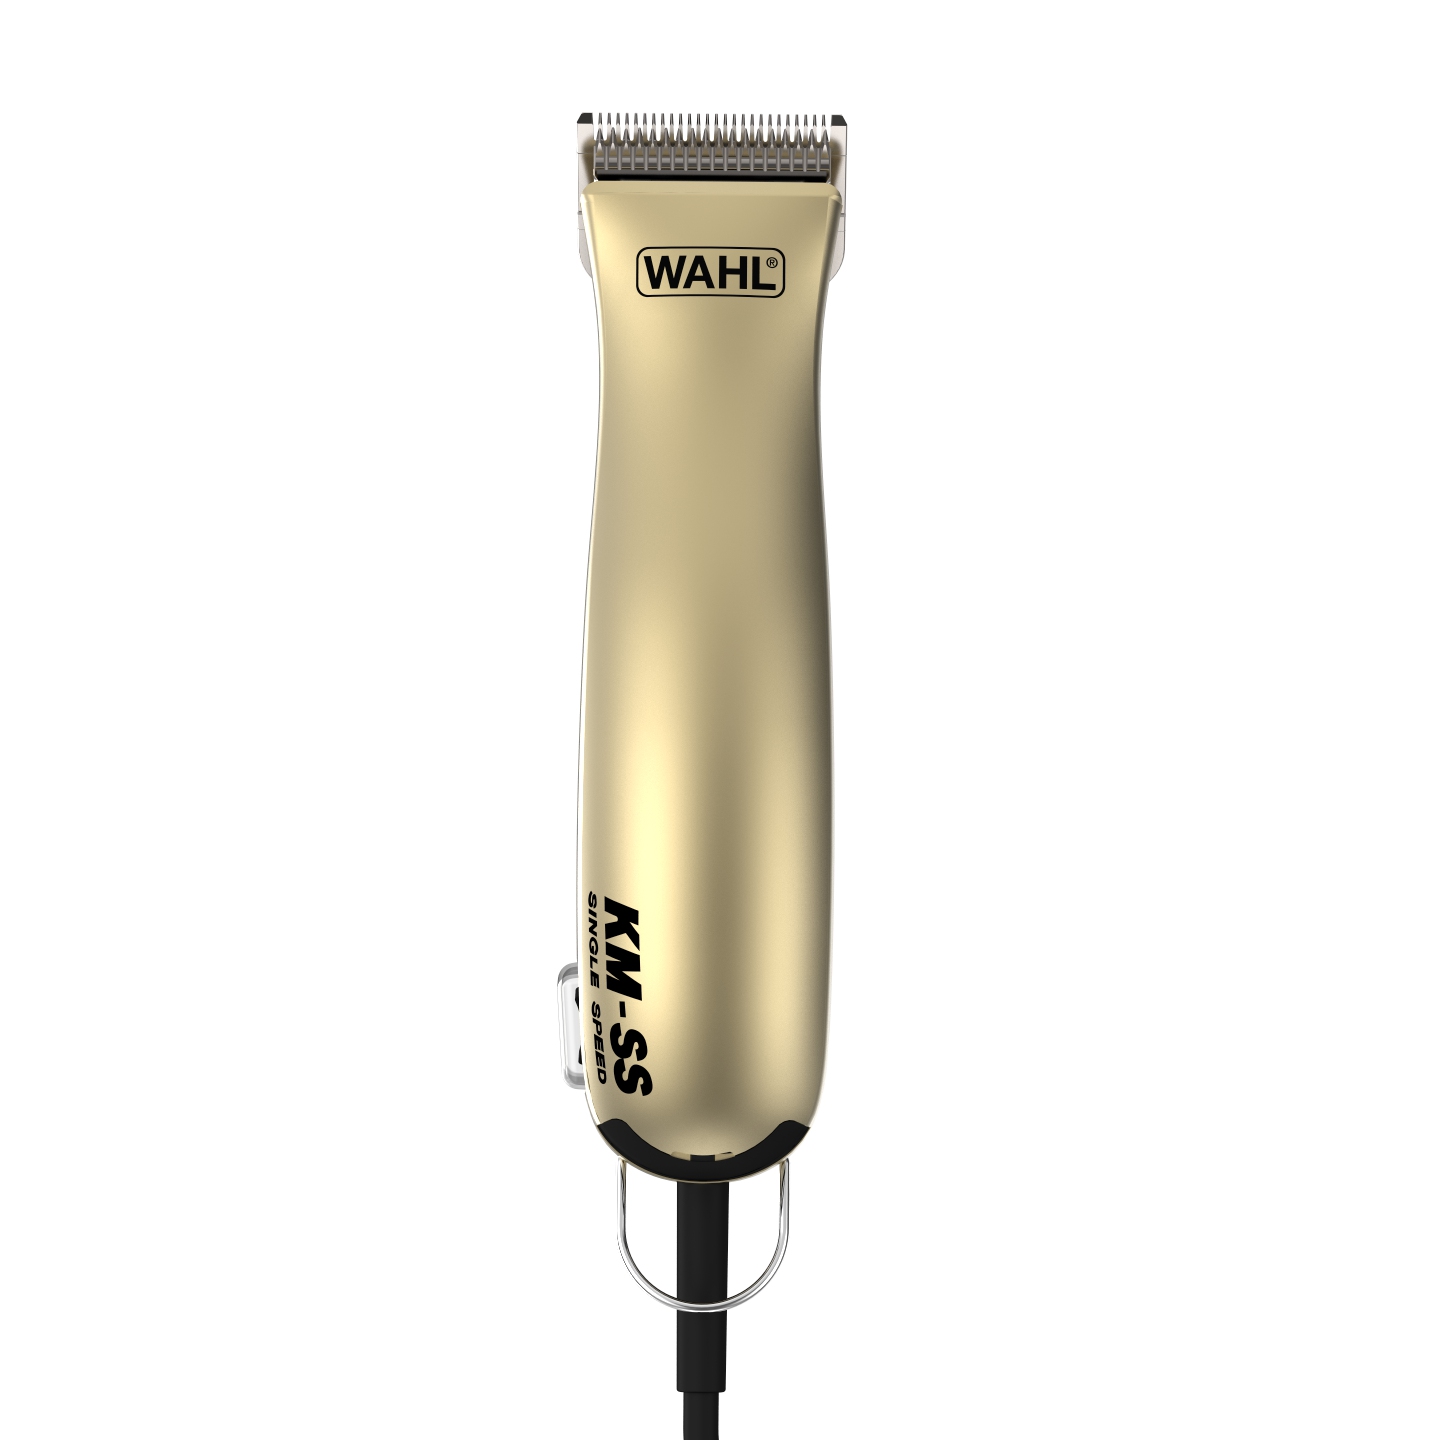 wahl dog clippers uk